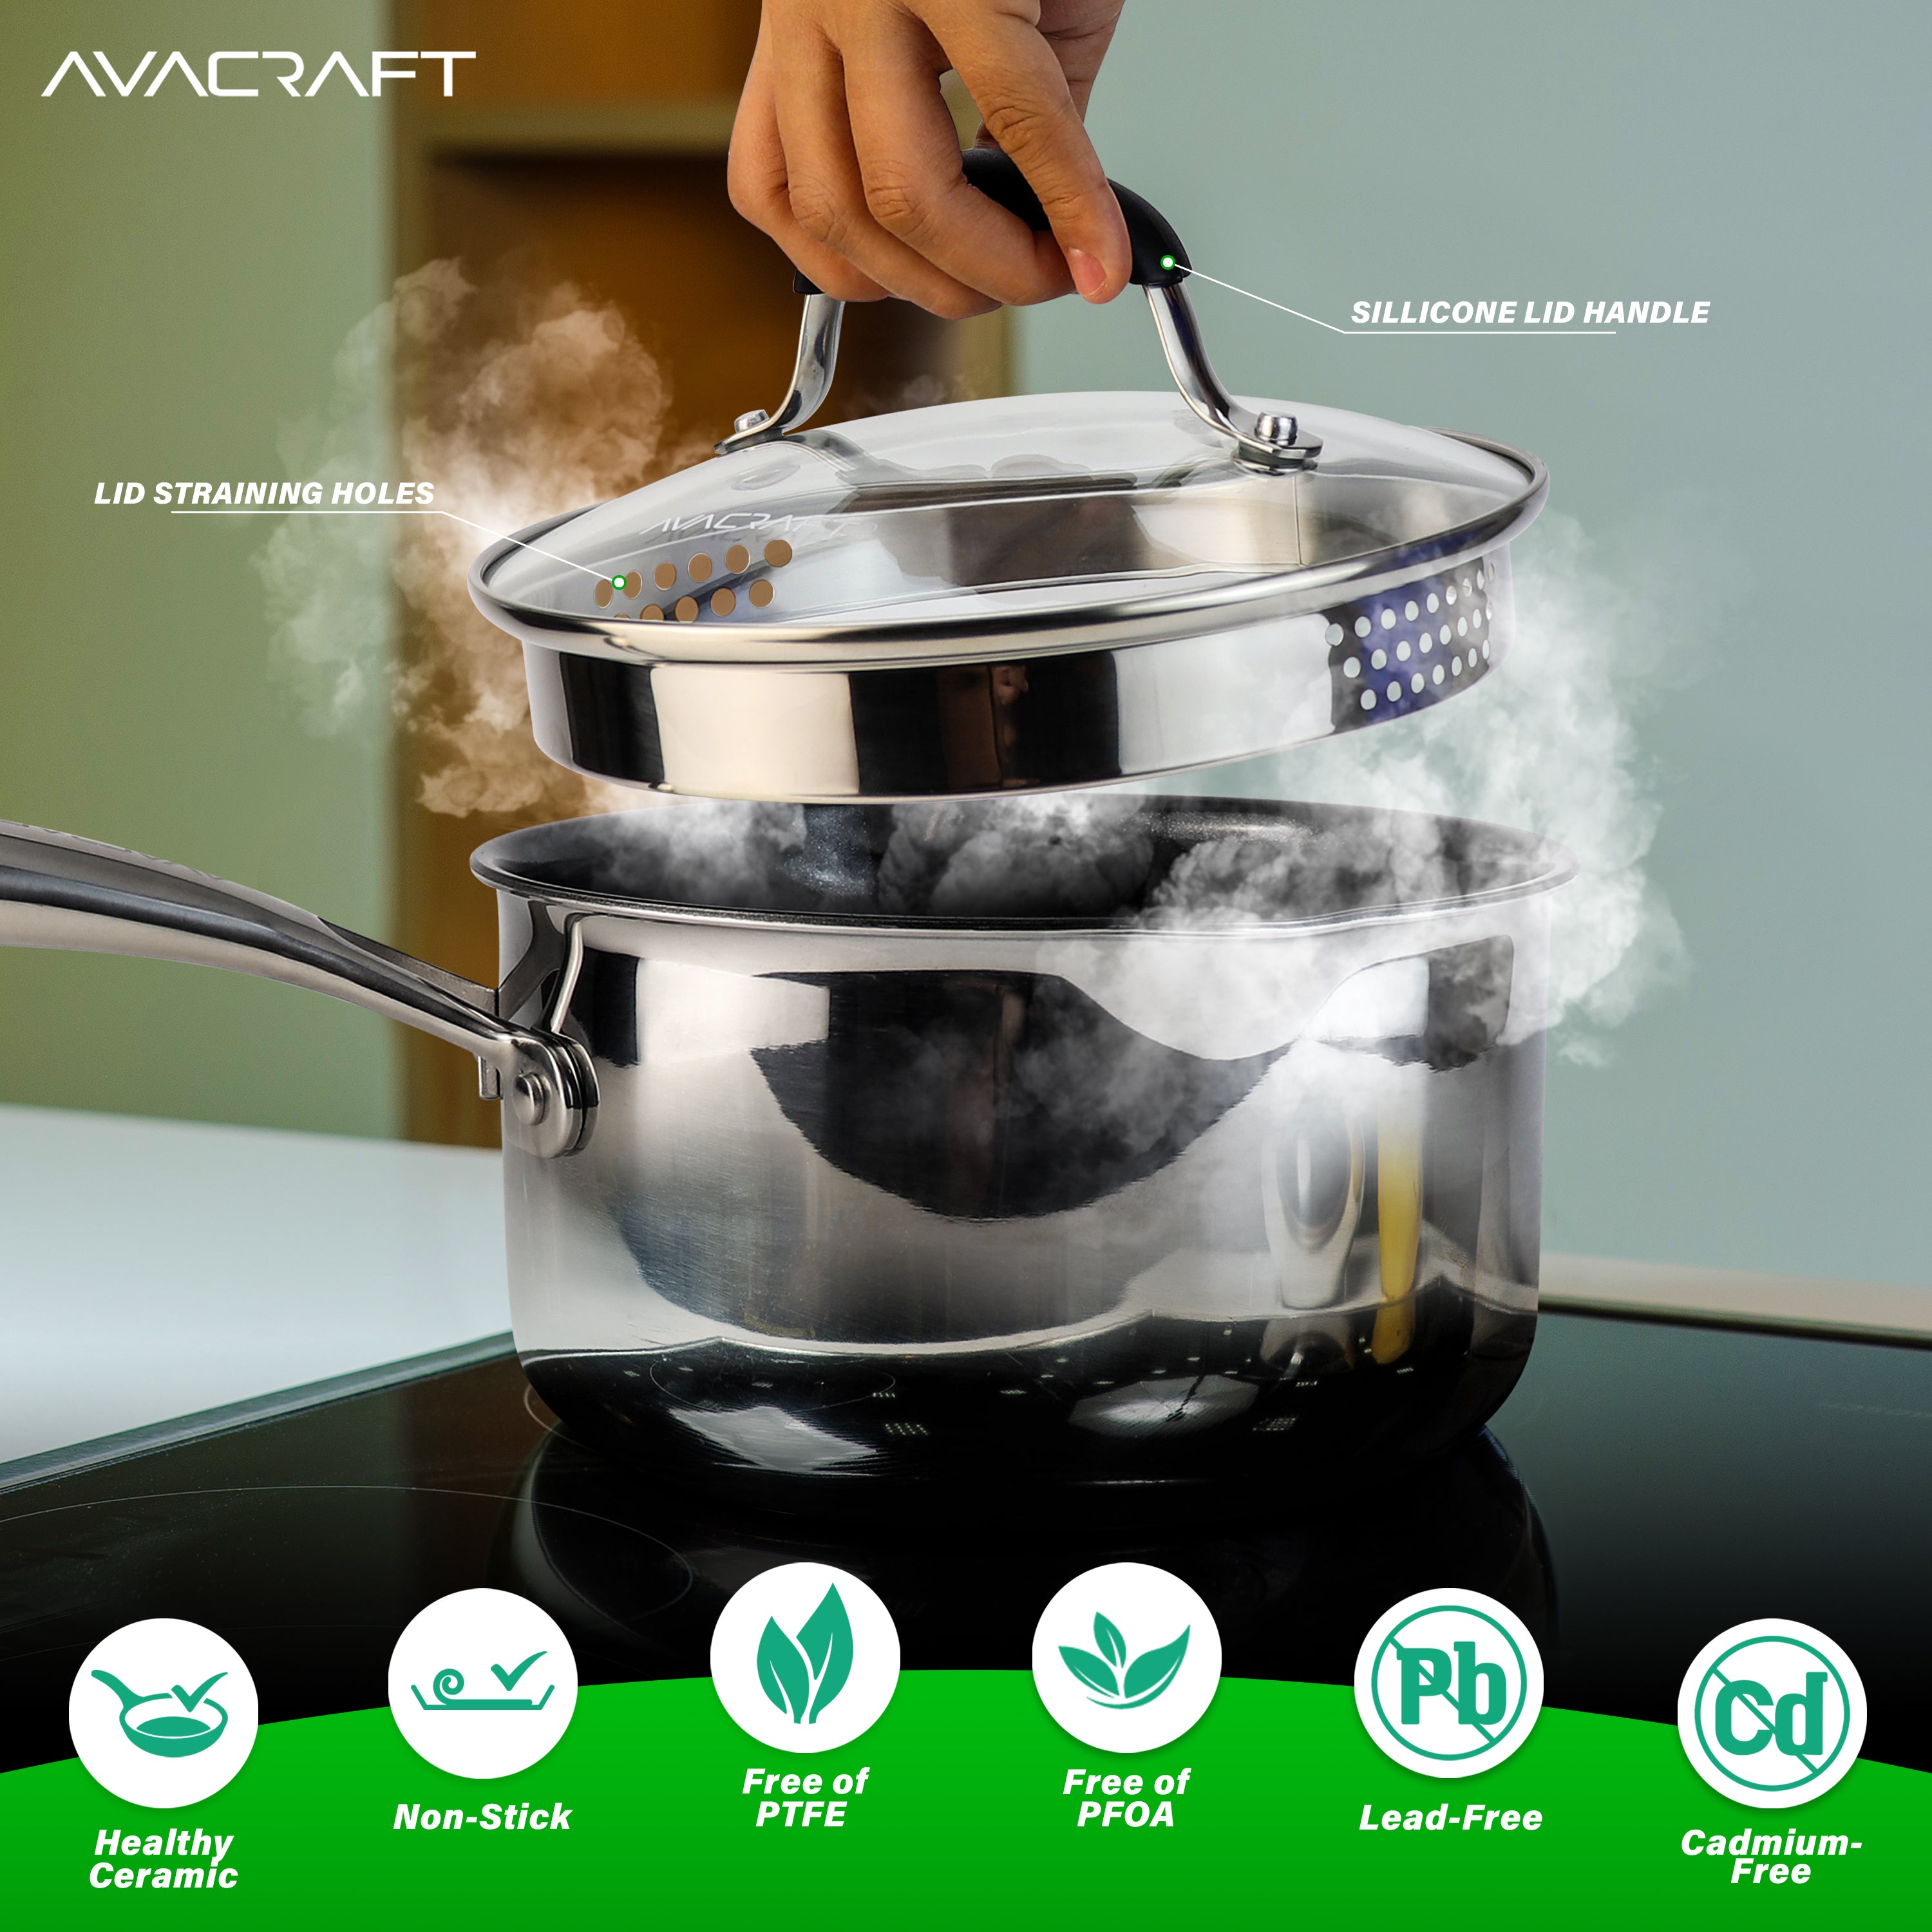 AVACRAFT Nonstick Saucepan with Glass Lid, Strainer Lid, 100% PTFE, PFOA Toxins Free, Two Side Spouts for Easy Pour, Multipurpose Sauce Pan with Lid